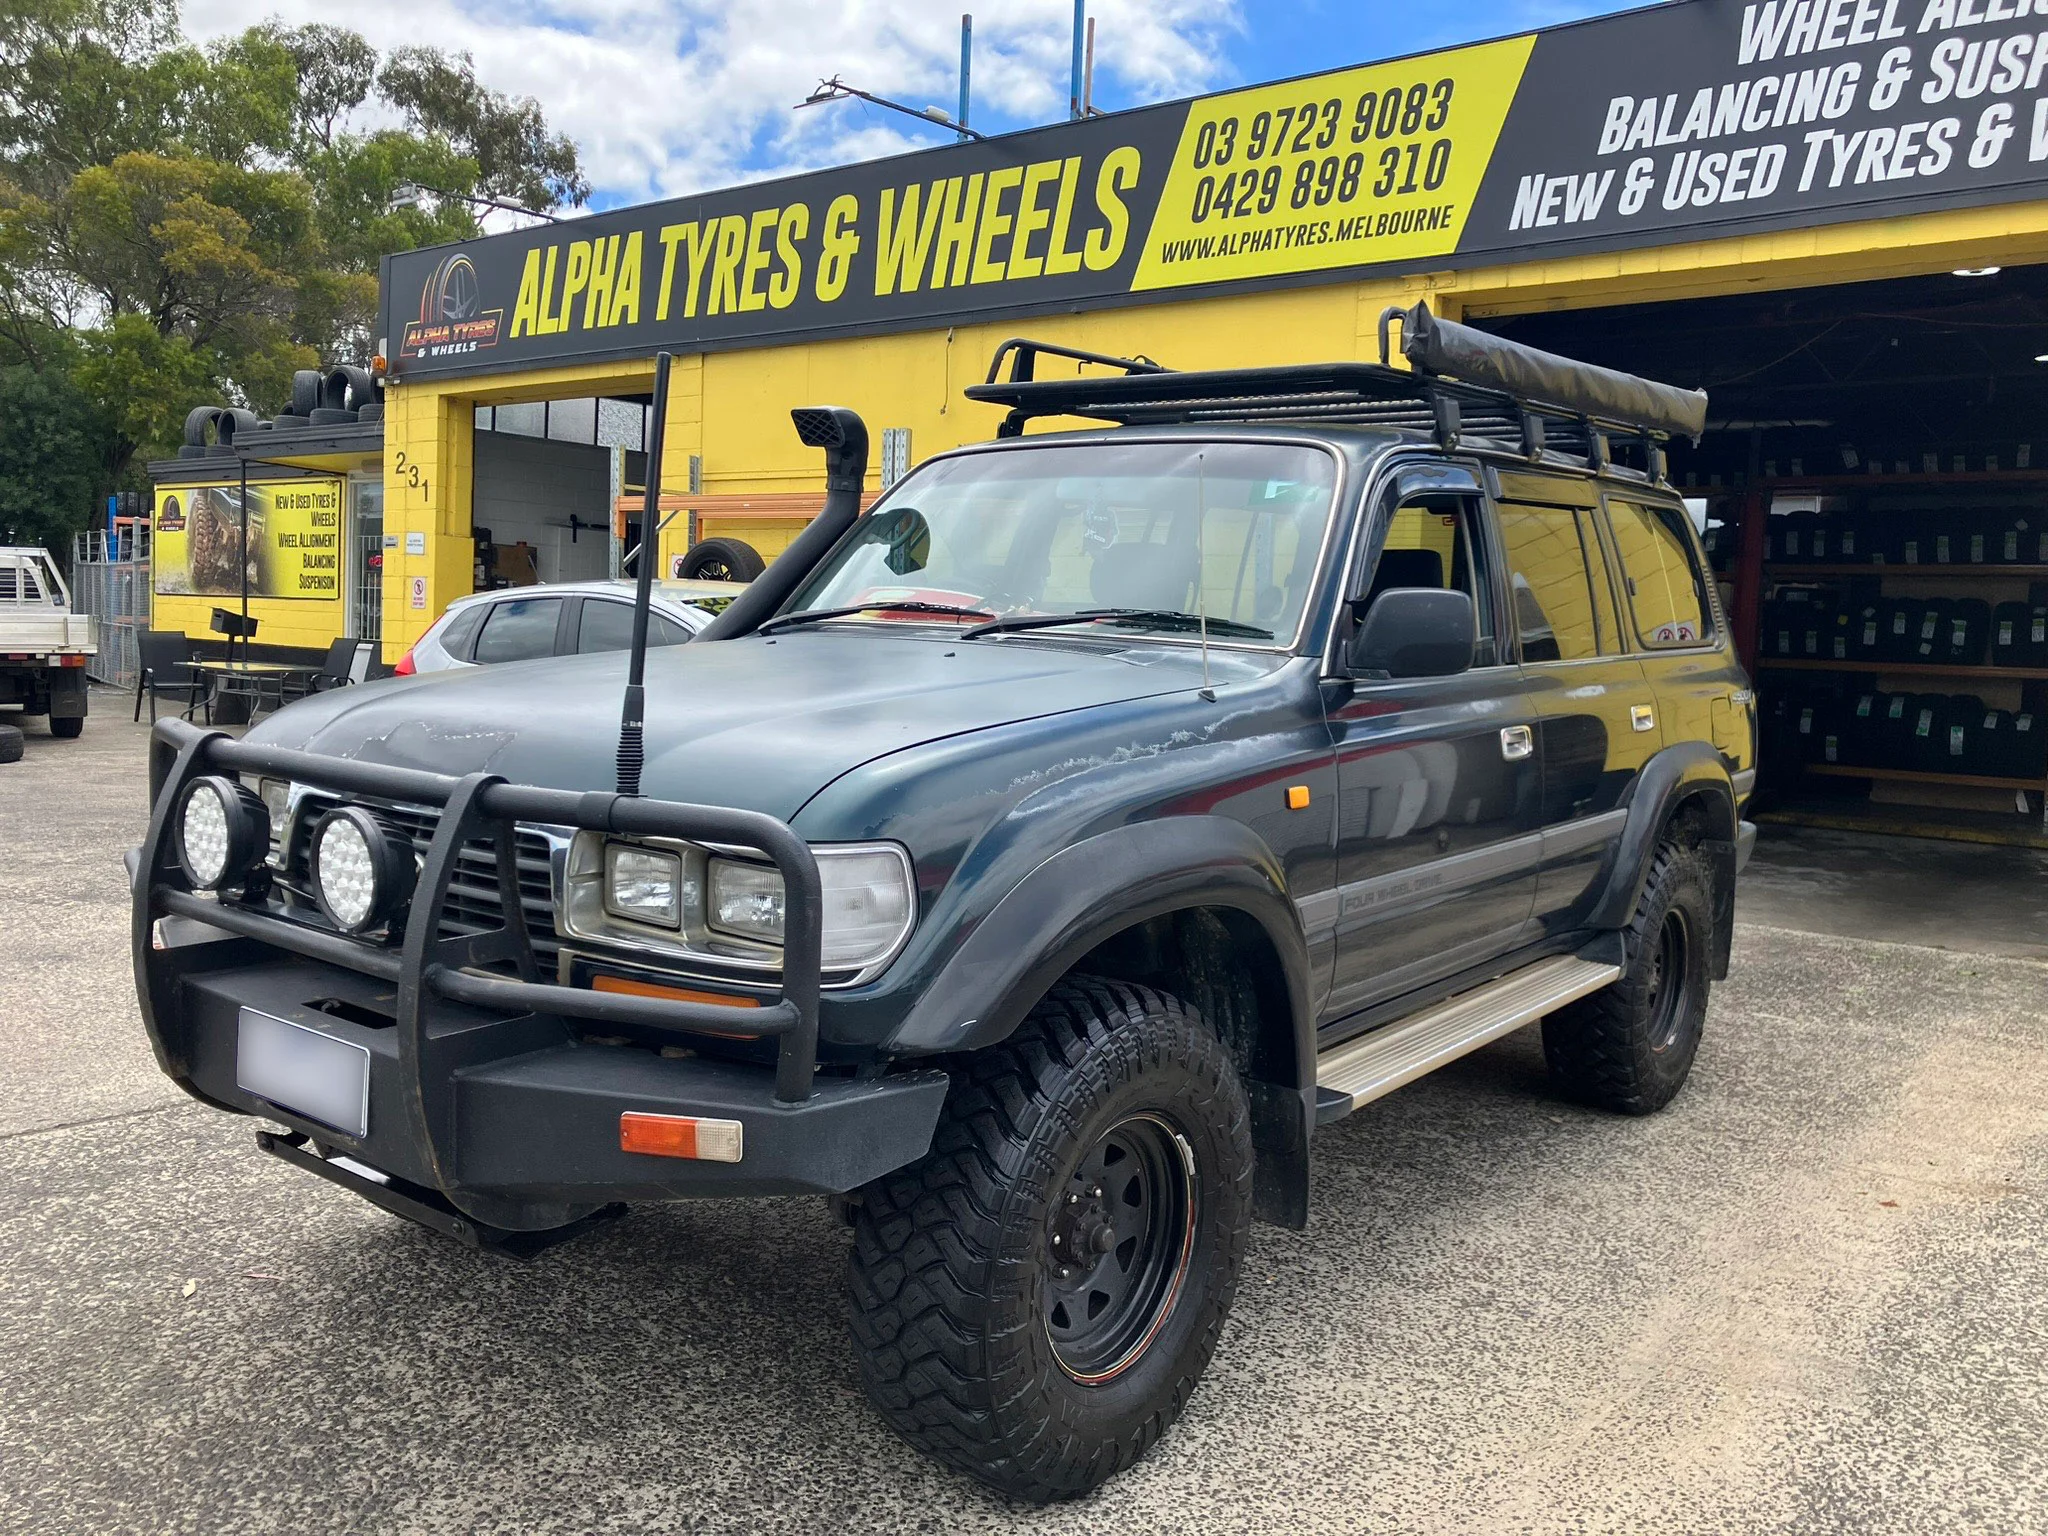 Get new or used tyres and wheels from alpha tyres and wheels in Melbourne